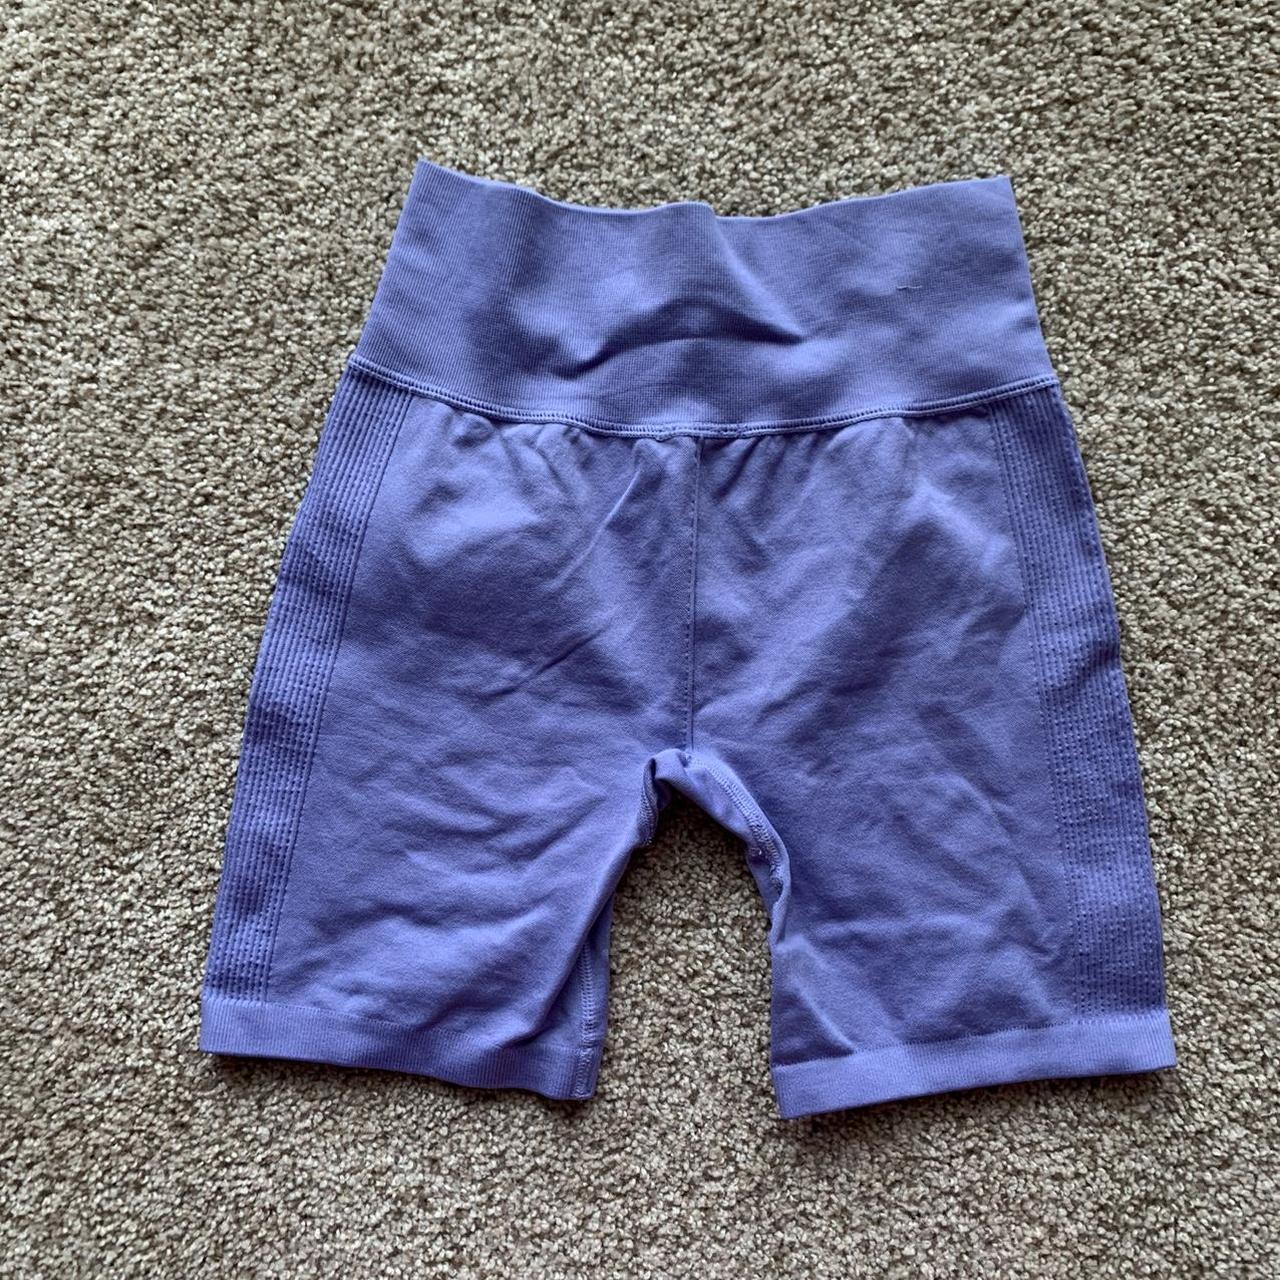 Bright purple biker shorts Great for the gym 💕 F21 - Depop